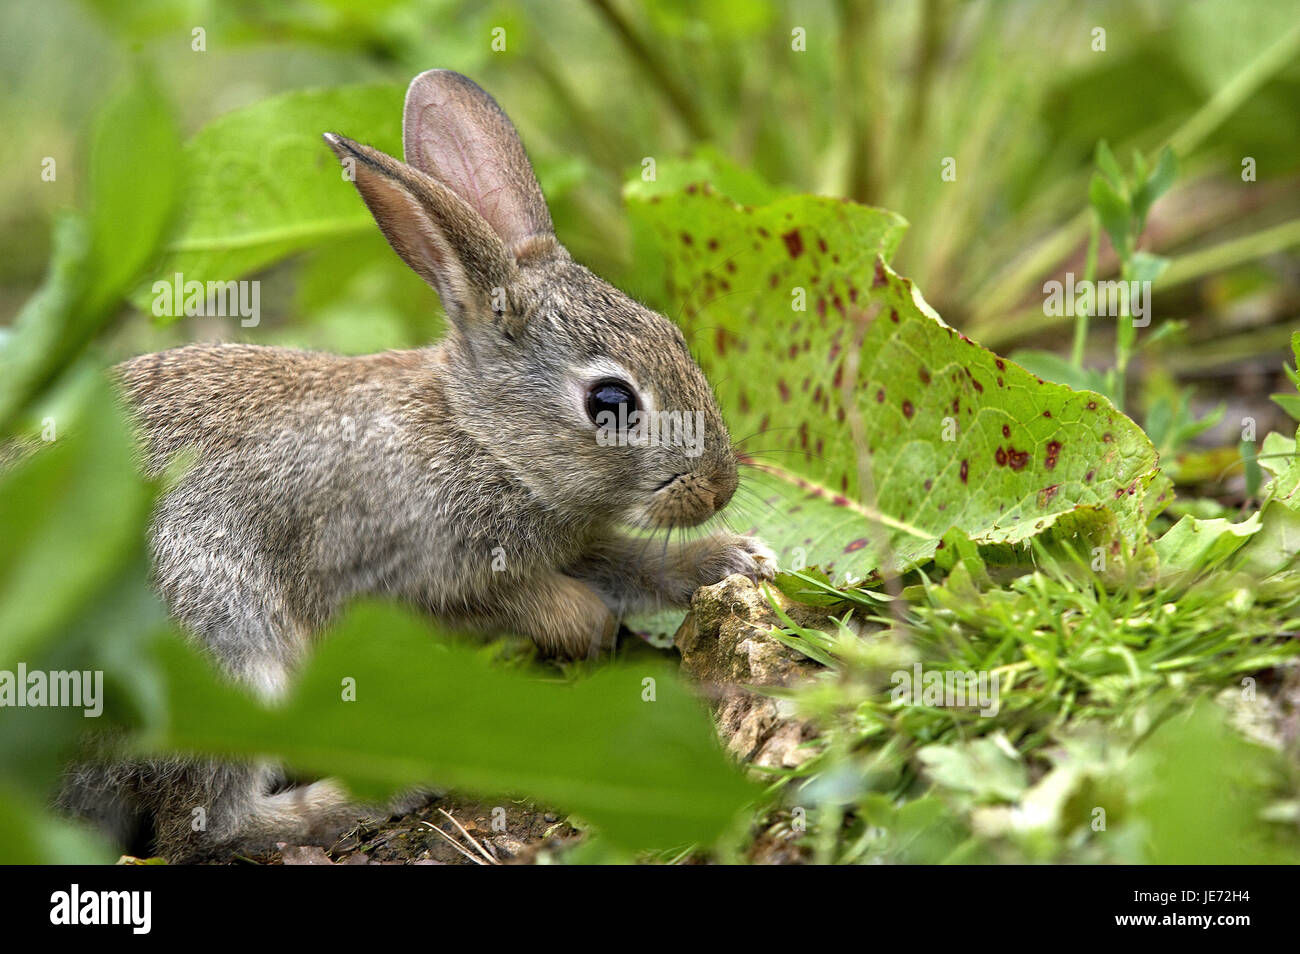 Wild rabbits, Oryctolagus cuniculus, young animal, Normandy, Stock Photo